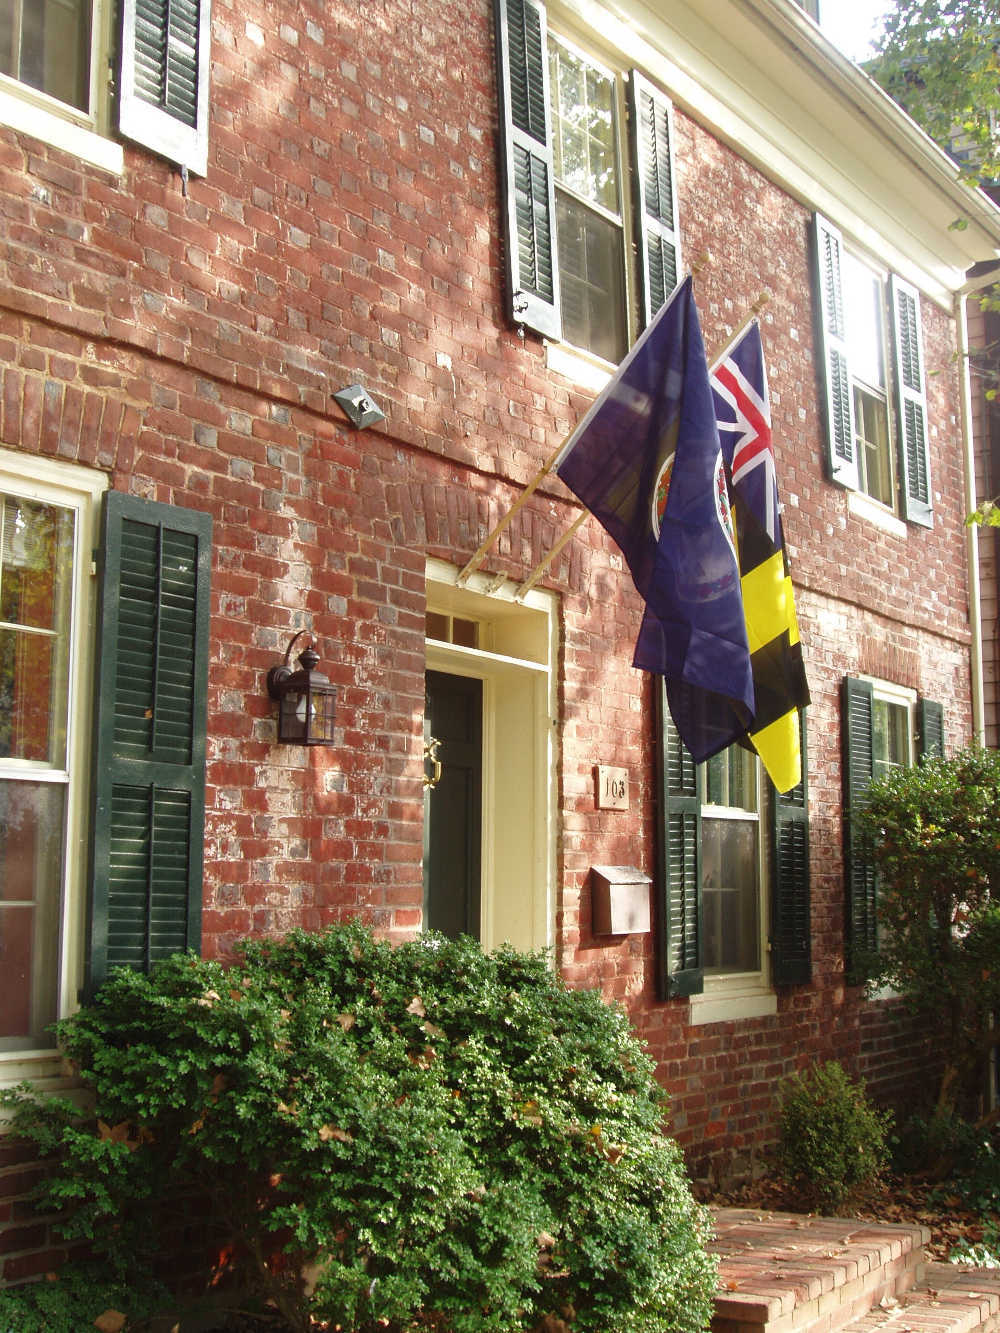 The Patrick Henry Fellows Residence (c. 1735) was purchased, renovated, and furnished with the assistance of an NEH grant. Image courtesy of the Starr Center.